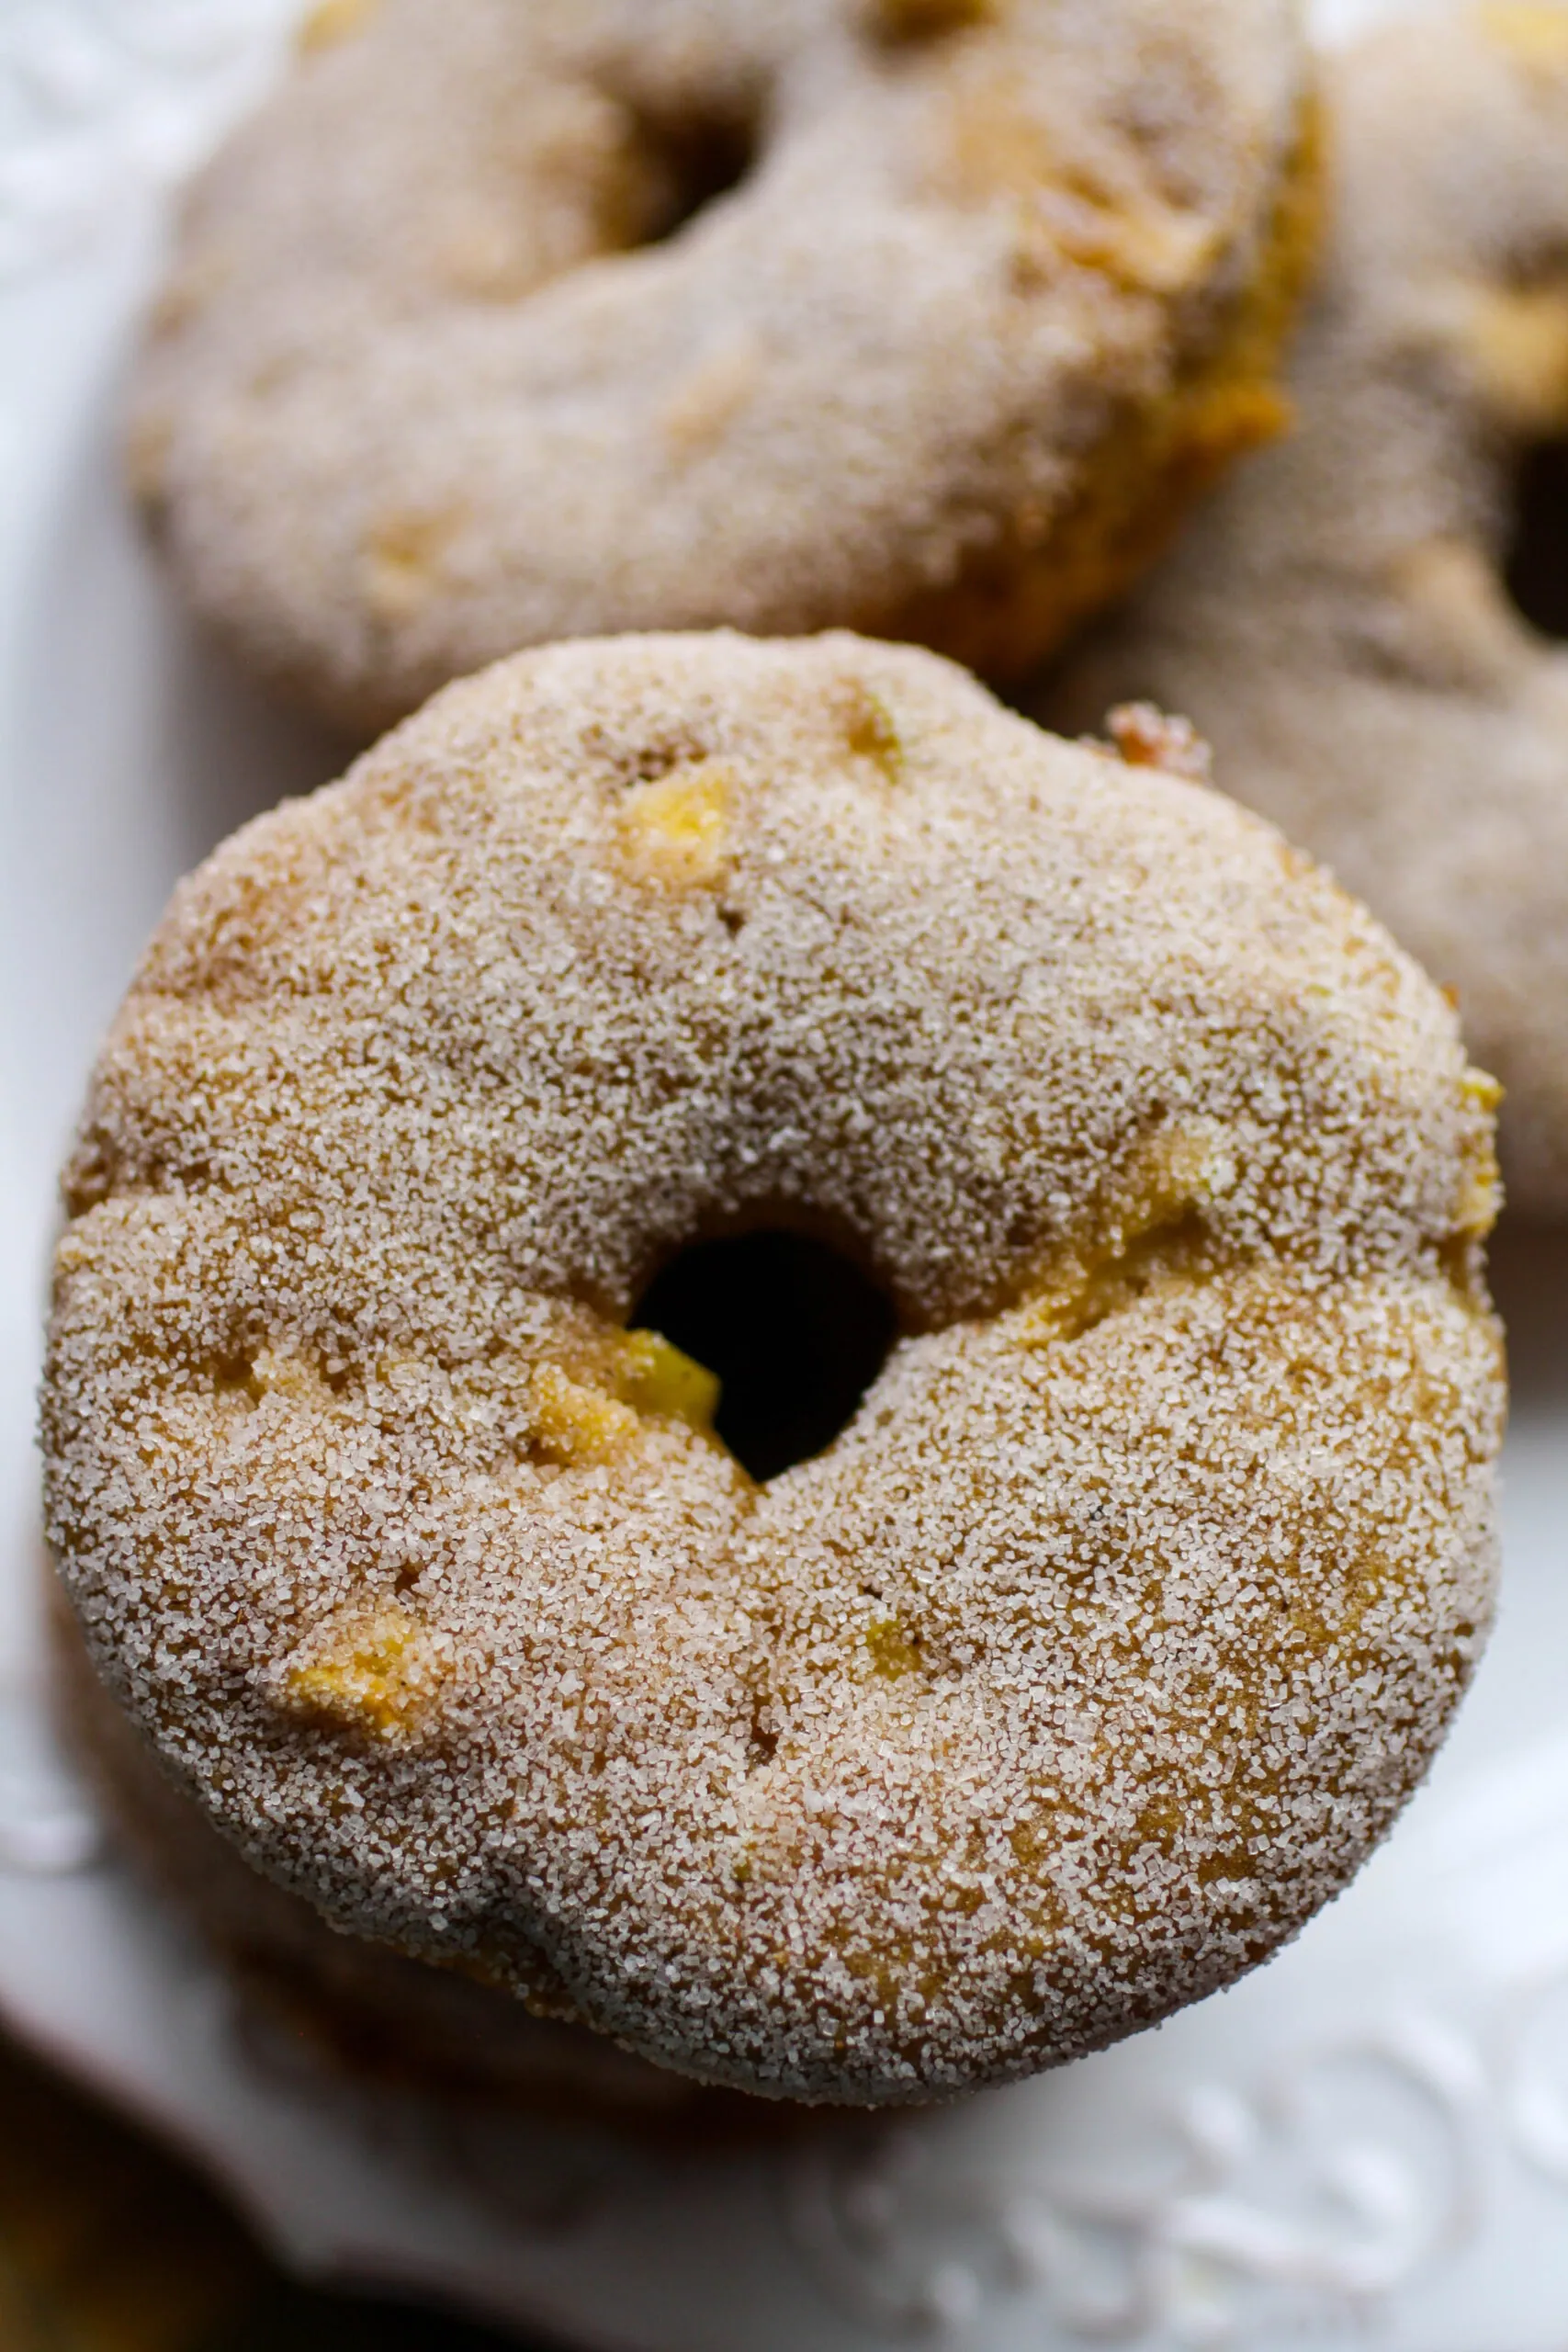 Baked Apple Cinnamon Donuts are great whether or not they're coated in cinnamon-sugar!